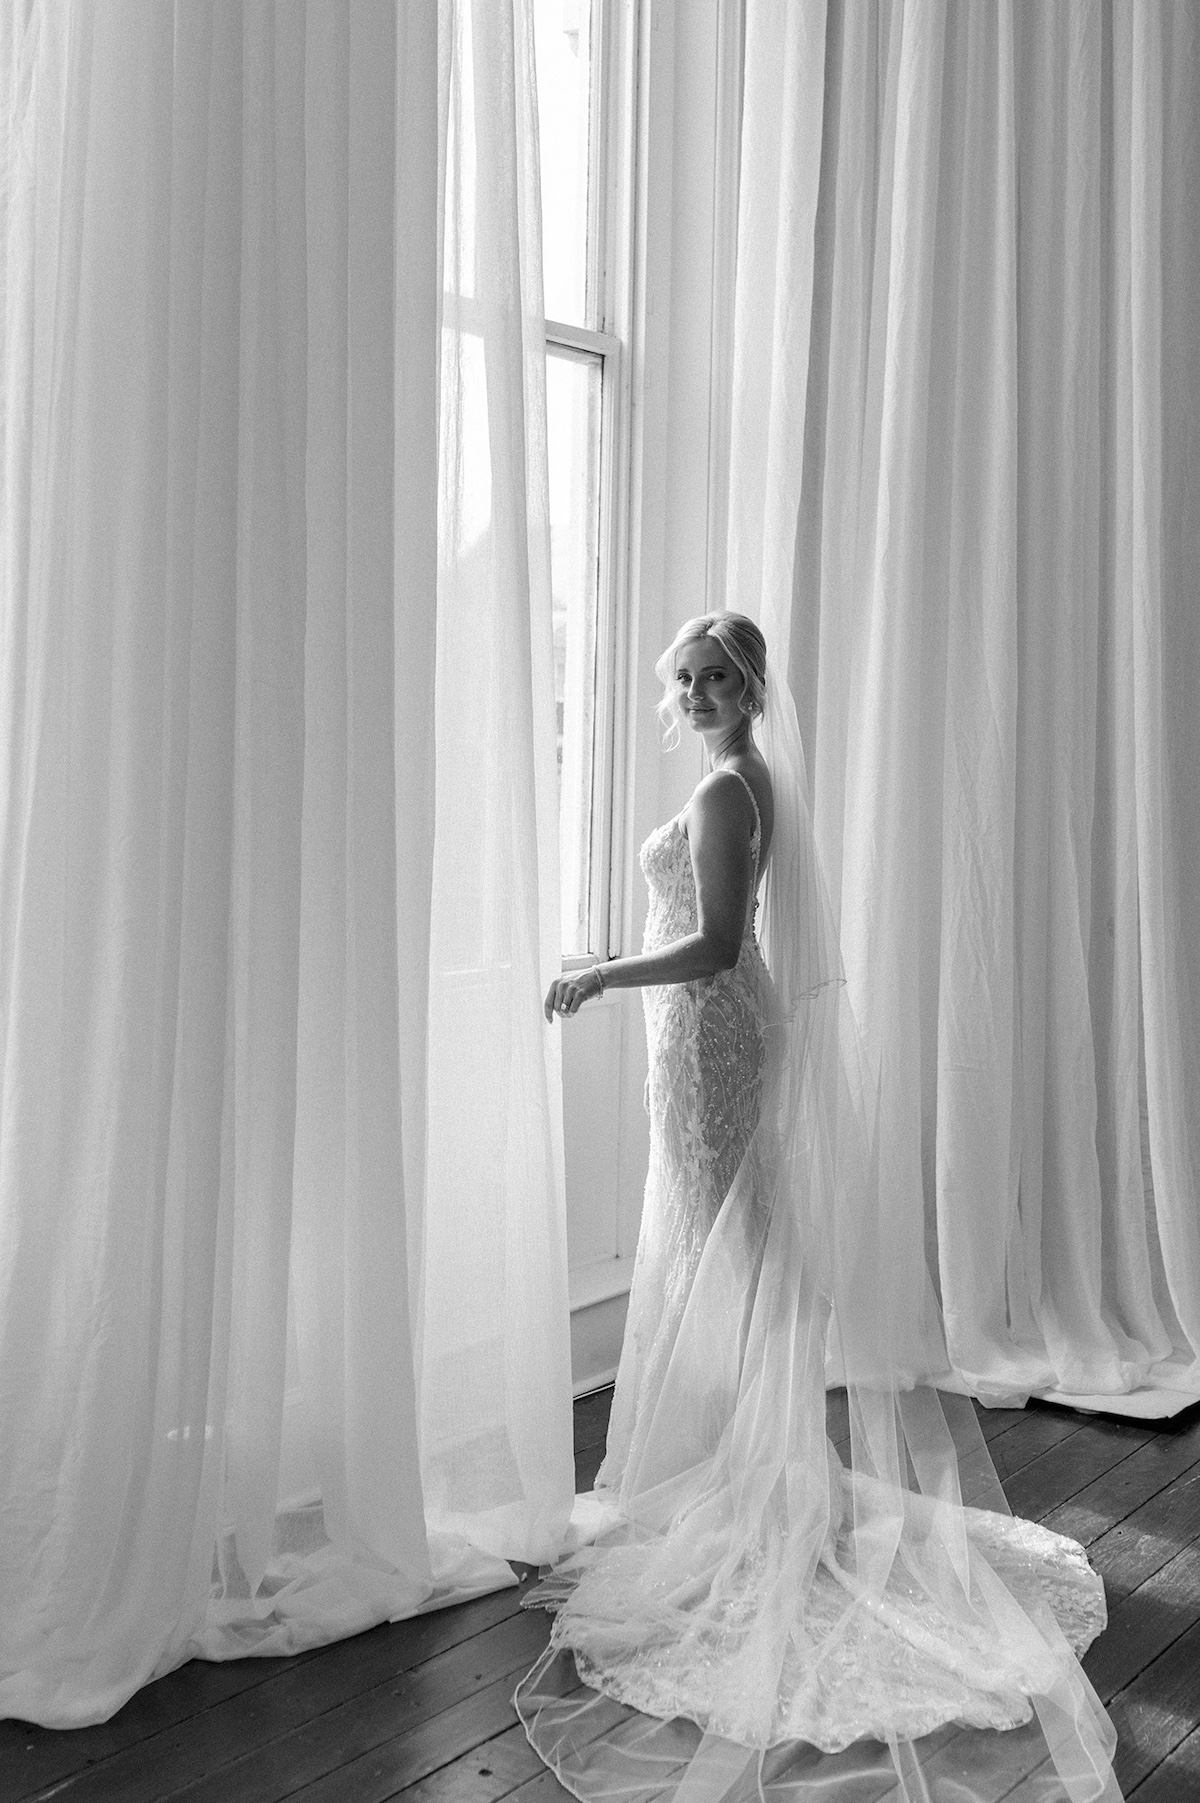 An editorial monochrome portrait of the bride, emphasizing elegance and creating a timeless visual narrative